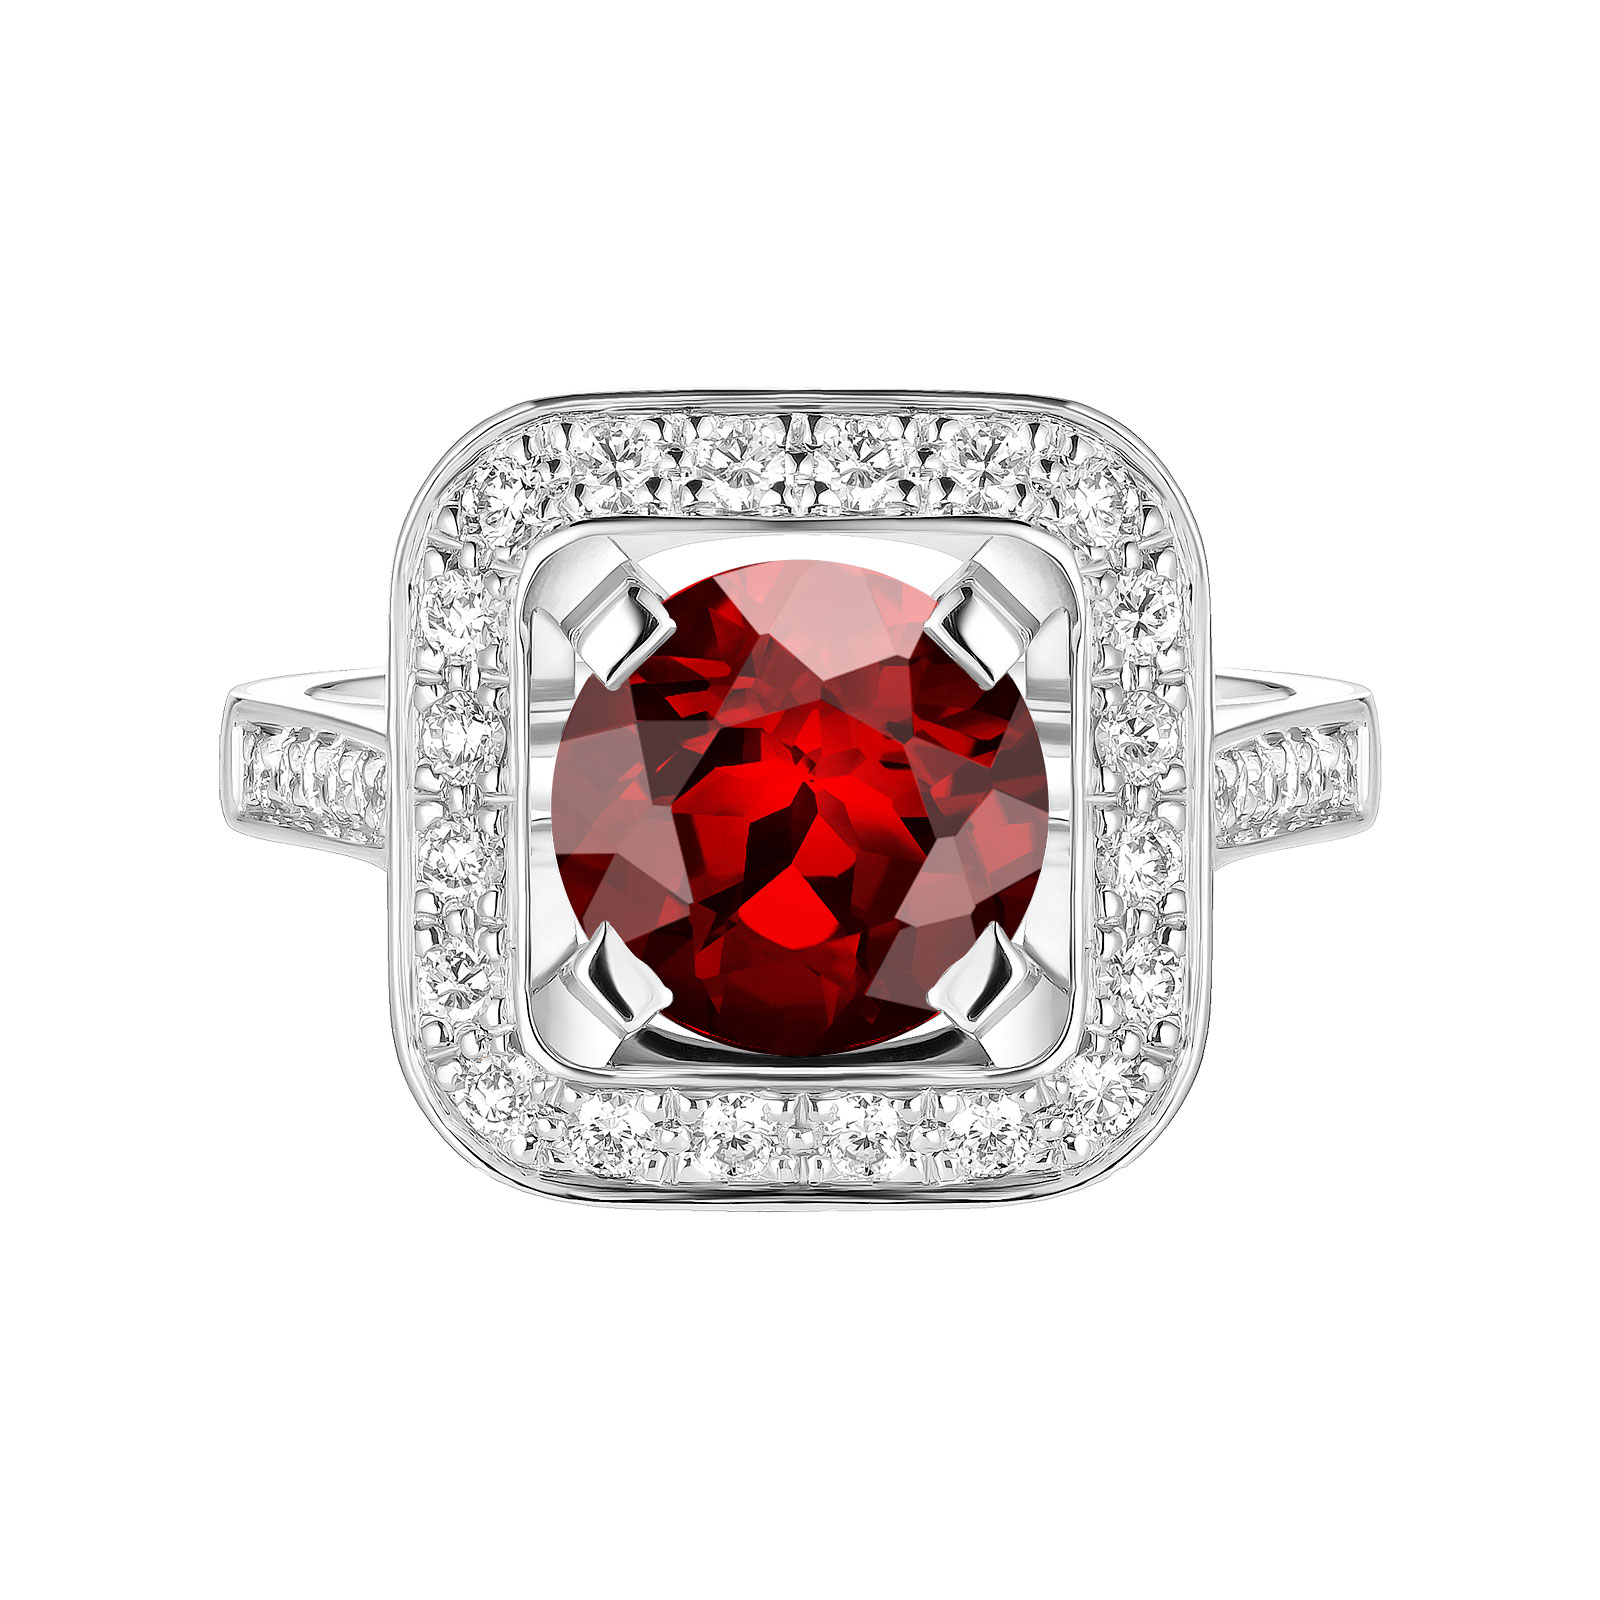 Ring White gold Garnet and diamonds Art Déco Rond 8 mm 1